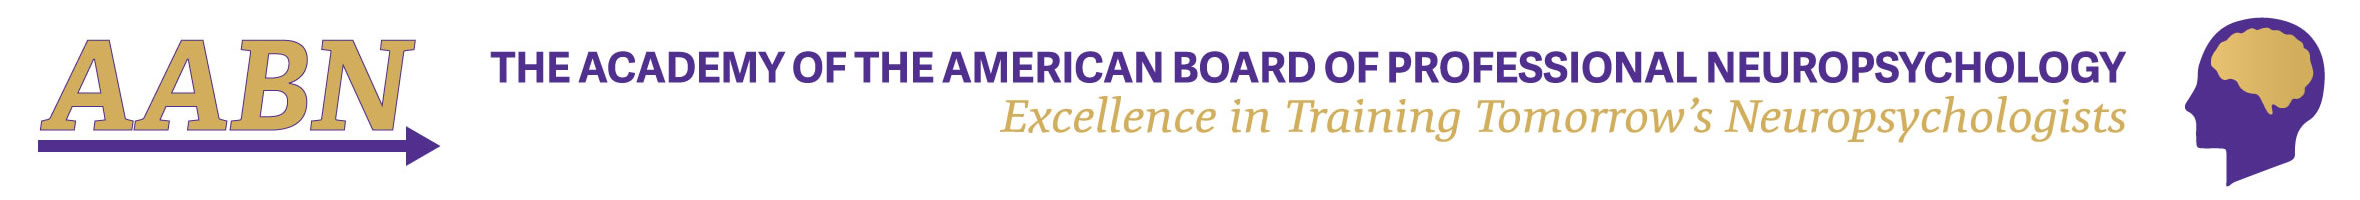 AABN The Academy of the American Board of Professional Neuropsychology